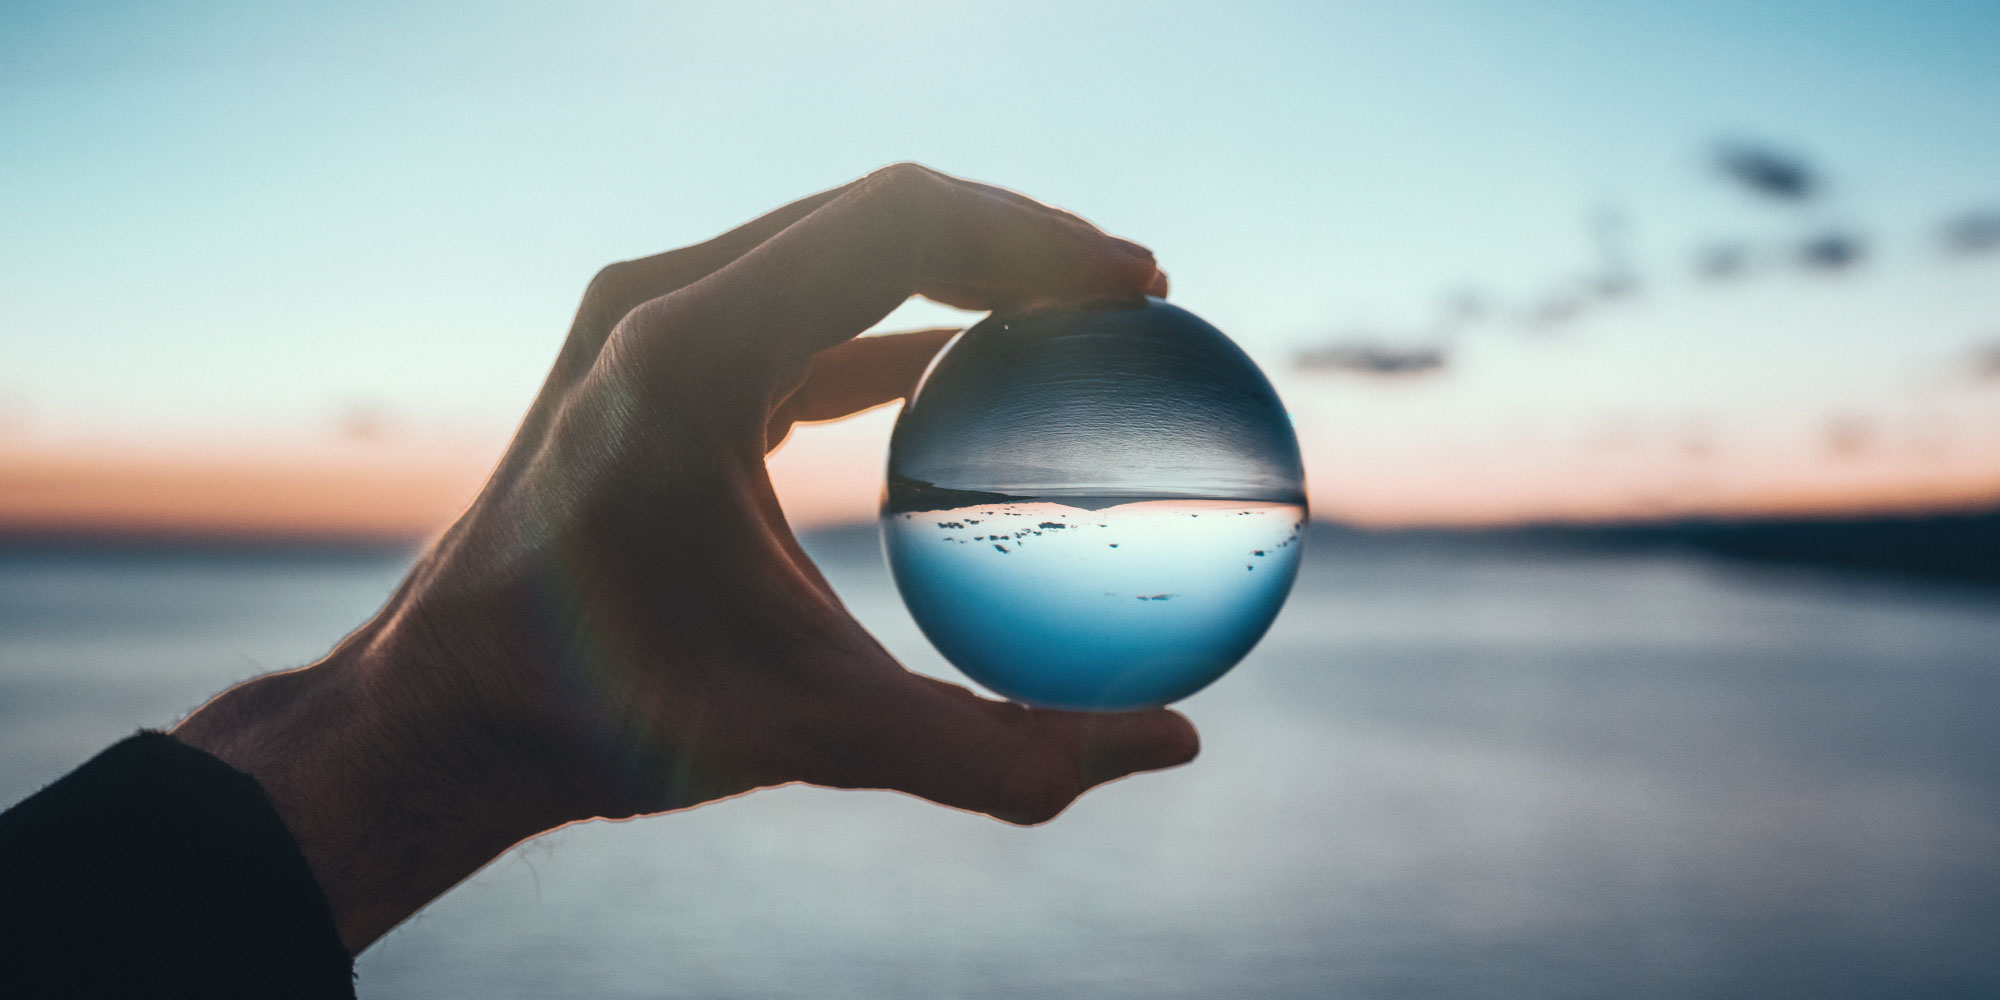 A hand holding a glass ball that inverts the horizon in the background